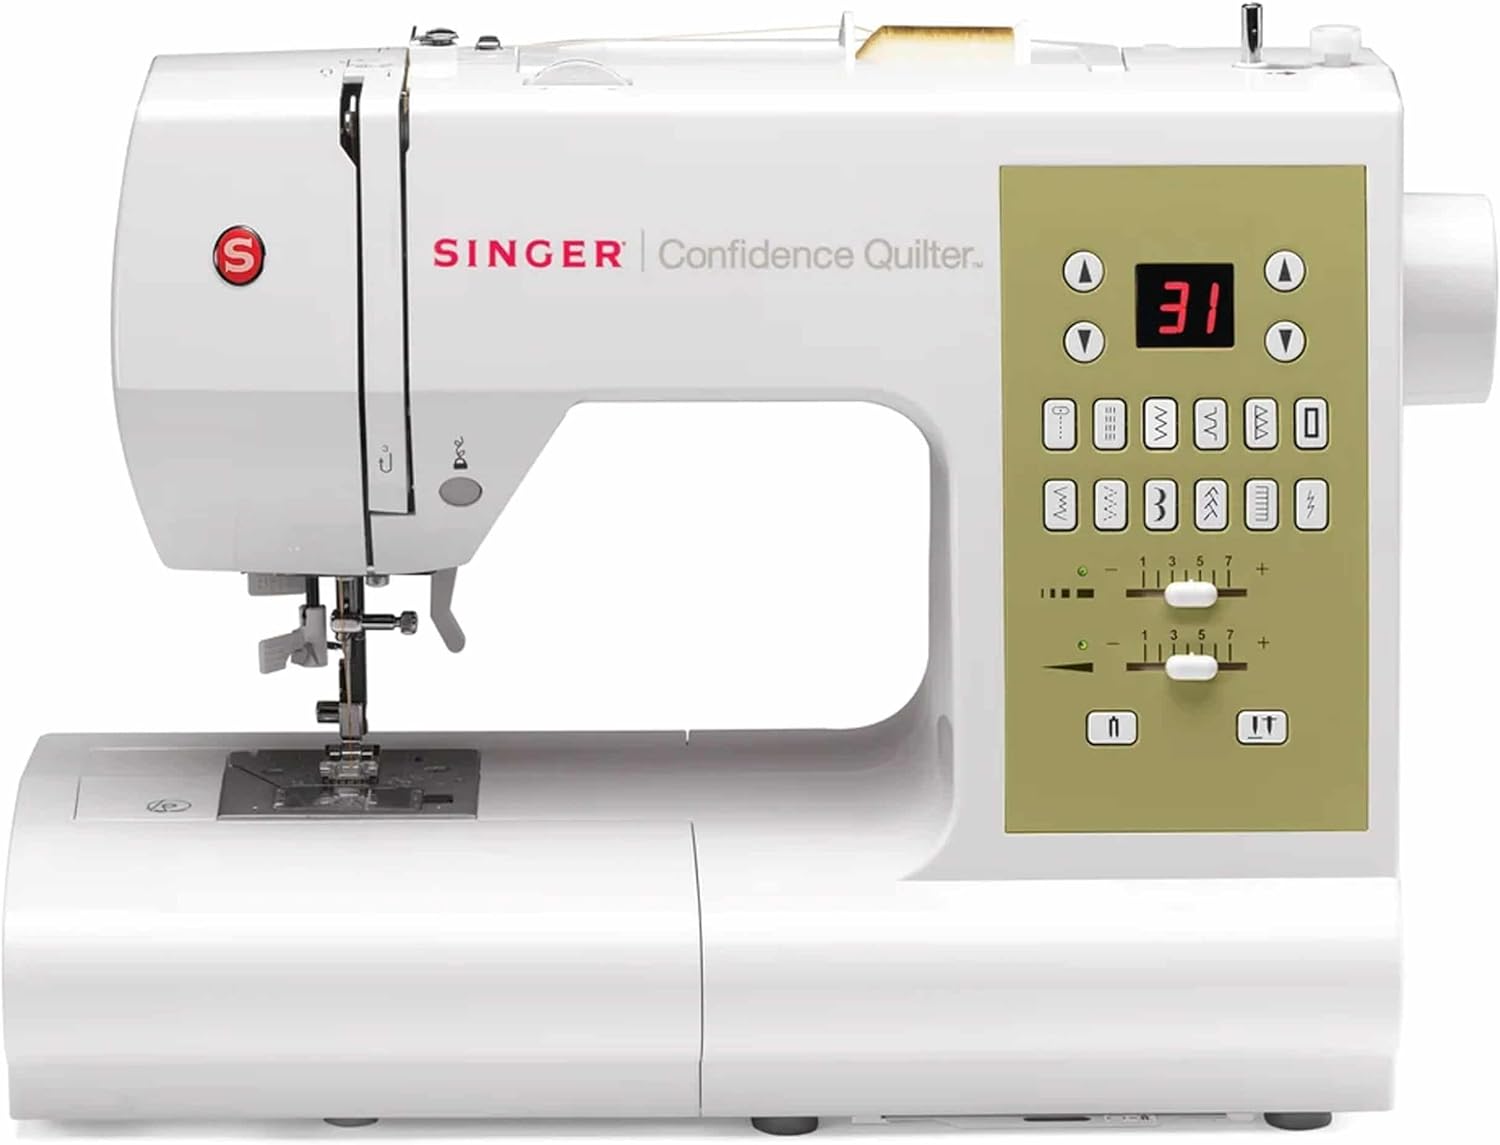 SINGER Confidence 7469Q sewing and quilting machine